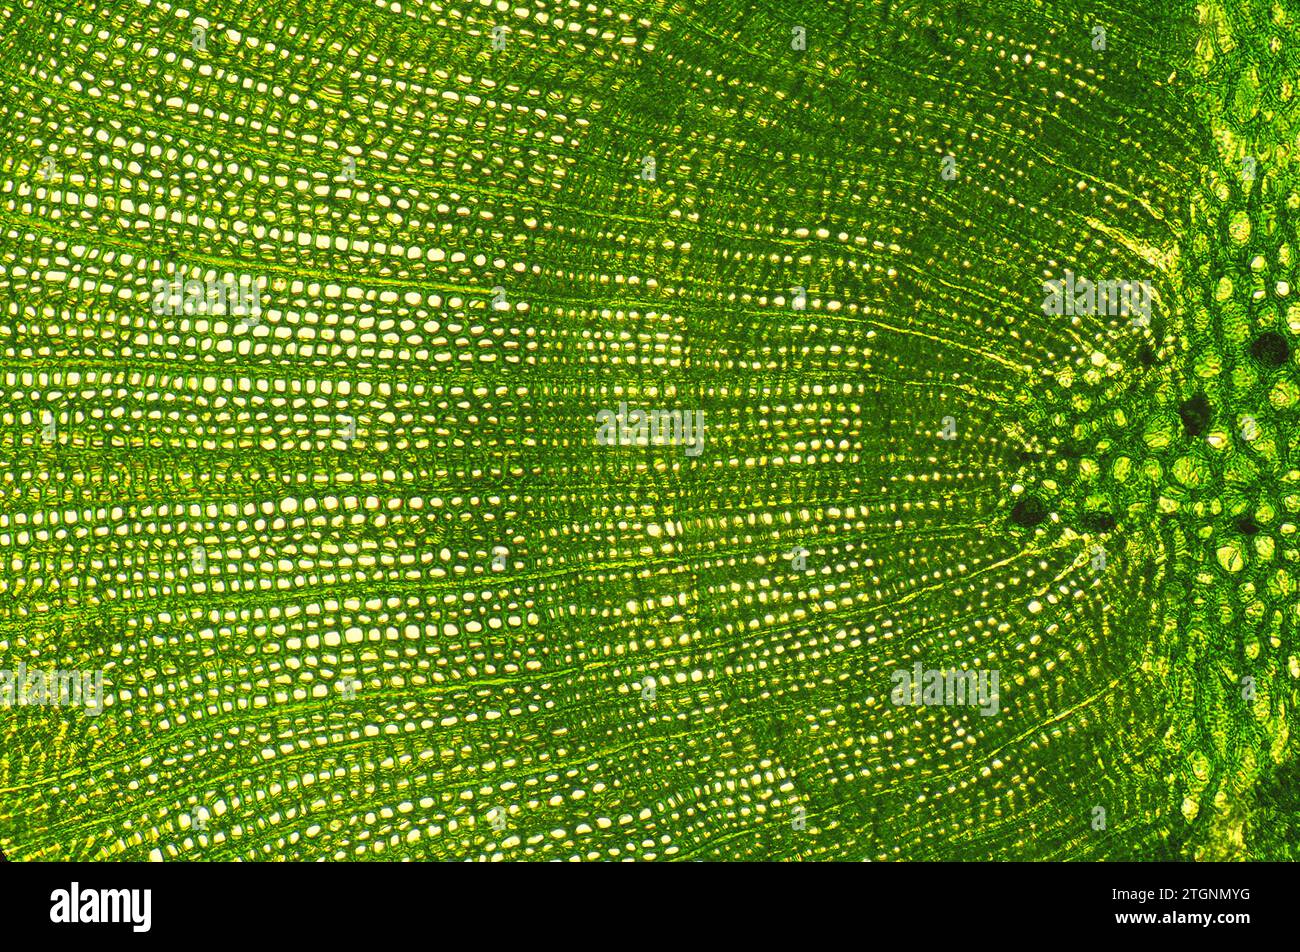 Cupressus sempervirens stem, cross section, showing secundary xylem and radial parenchyma. Photomicrograph. Stock Photo